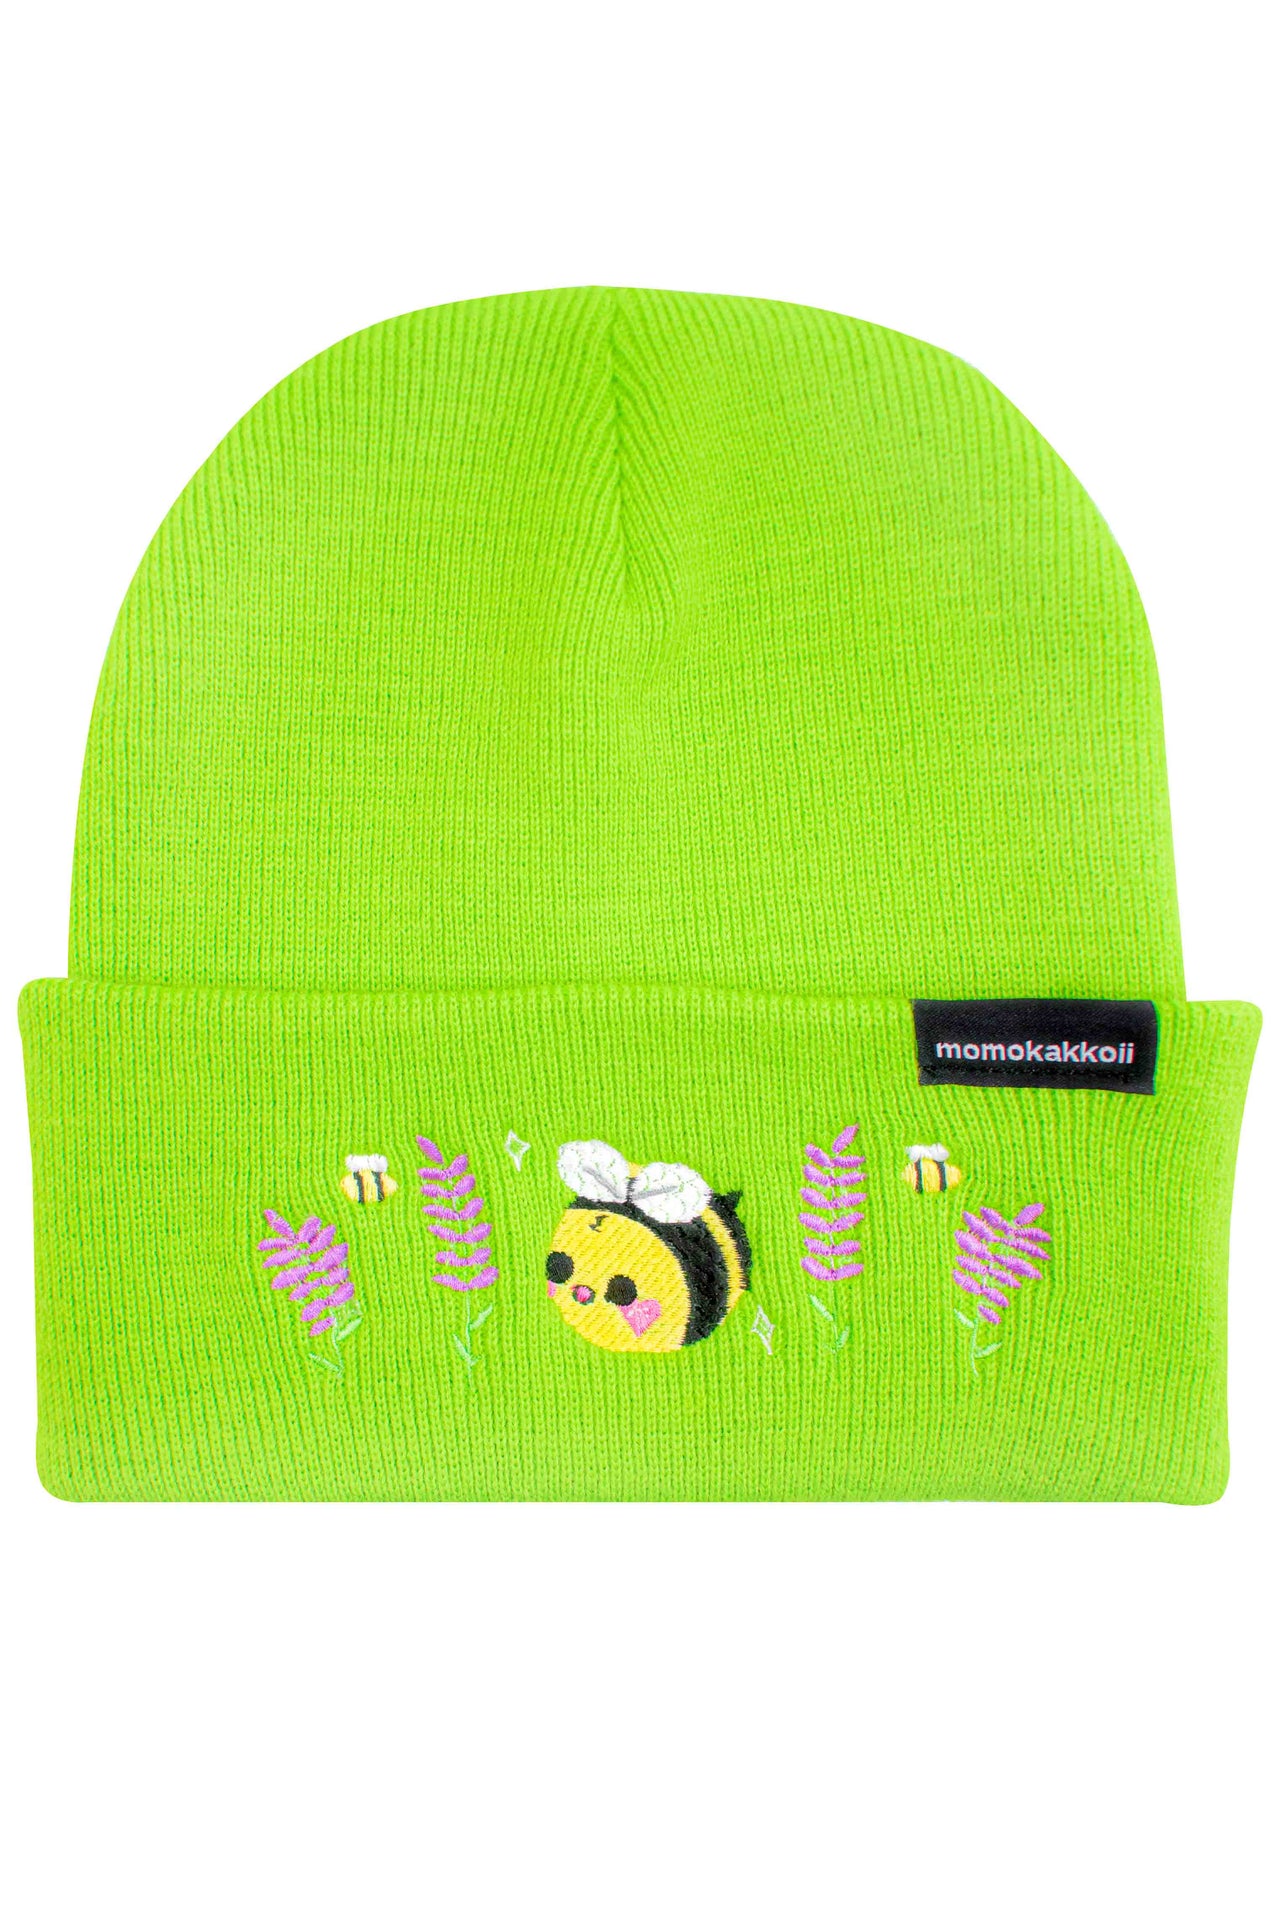 Lavender Bibi The Bee Embroidered Beanie